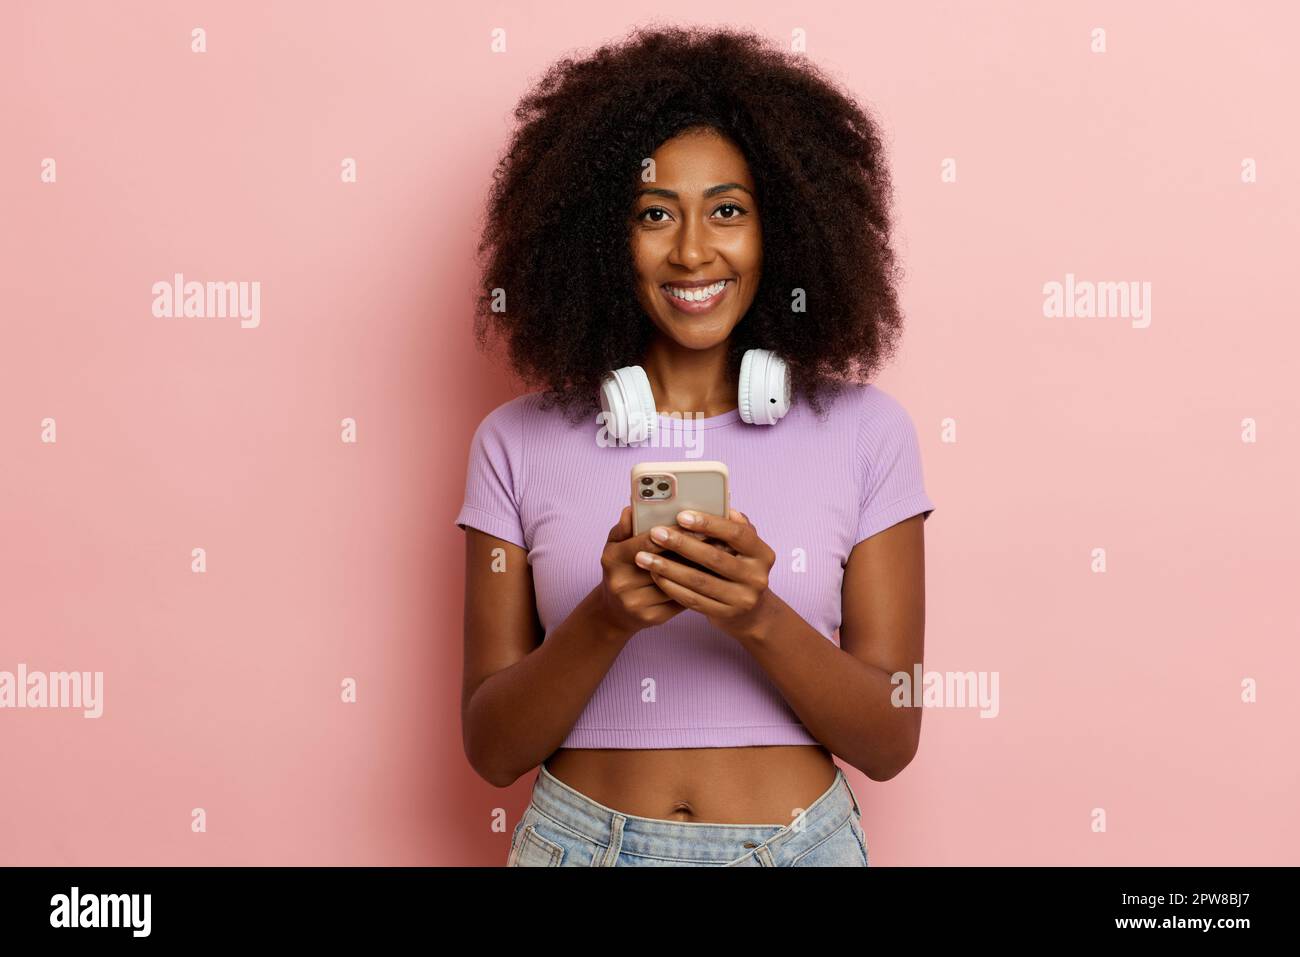 Attractive positive ethnic girl with fluffy hair, smiles toothily and looks to the camera, uses phone for messaging, dressed in casual cloth, poses ov Stock Photo